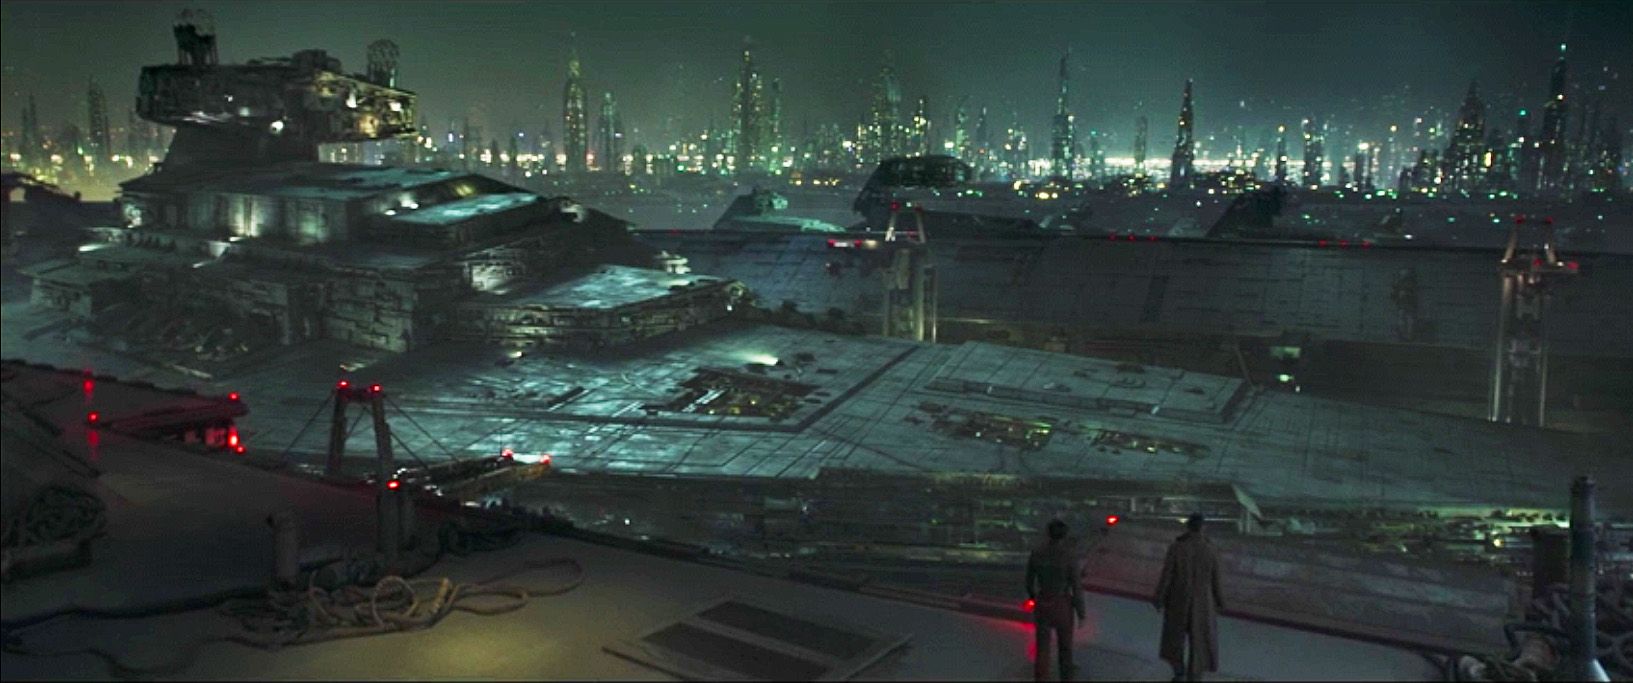 A Star Destroyer grounded on Coruscant in The Mandalorian Season 3 trailer.